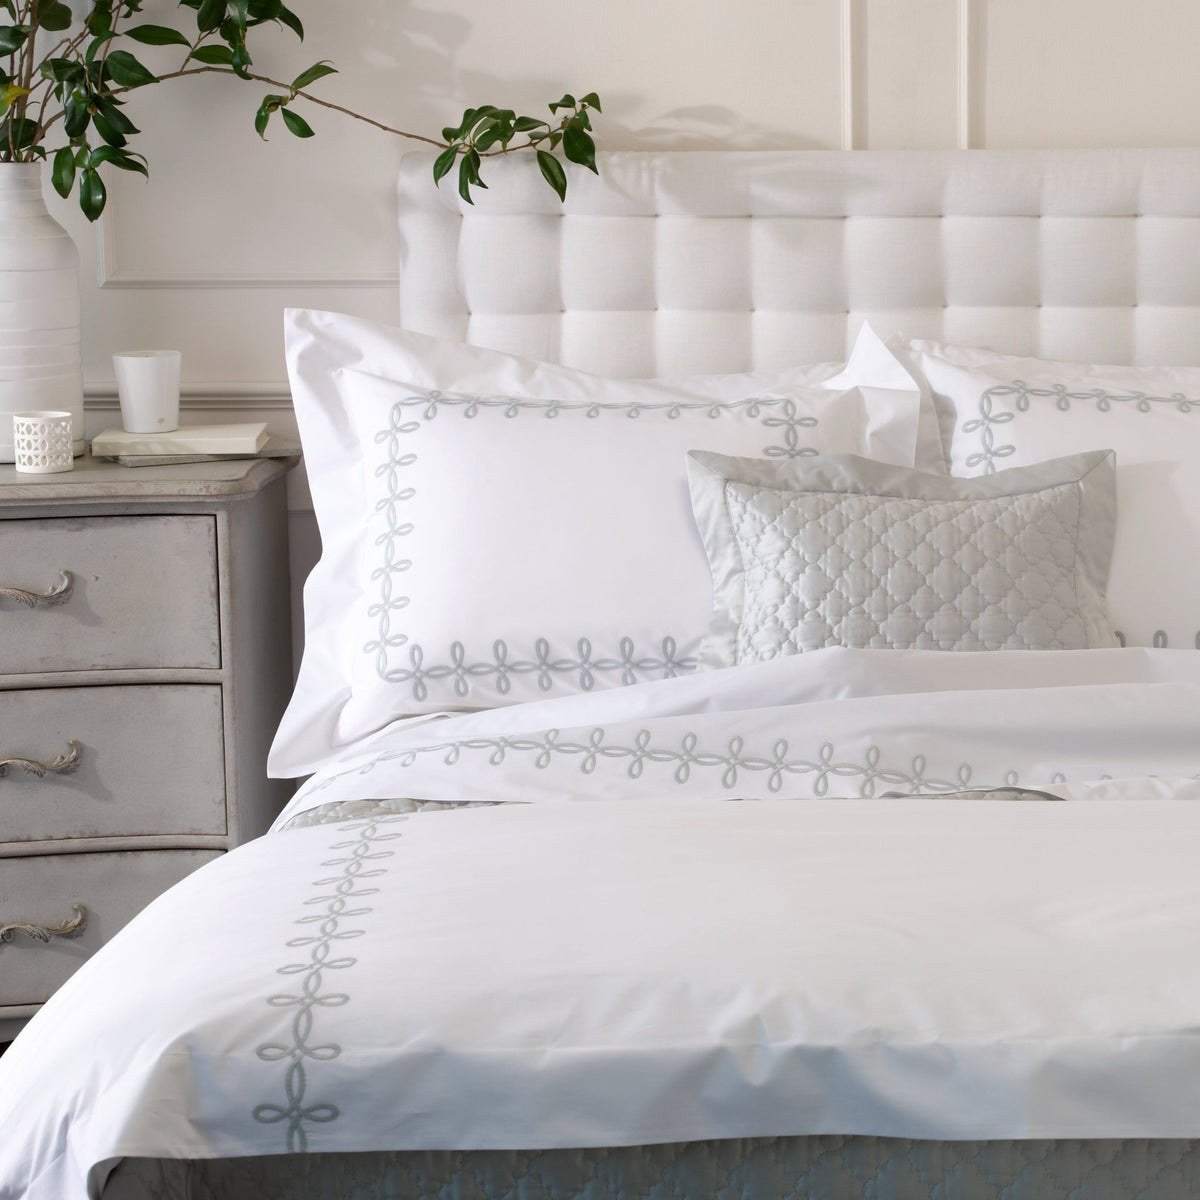 Side View of Matouk Gordian Knot Bedding Lifestyle